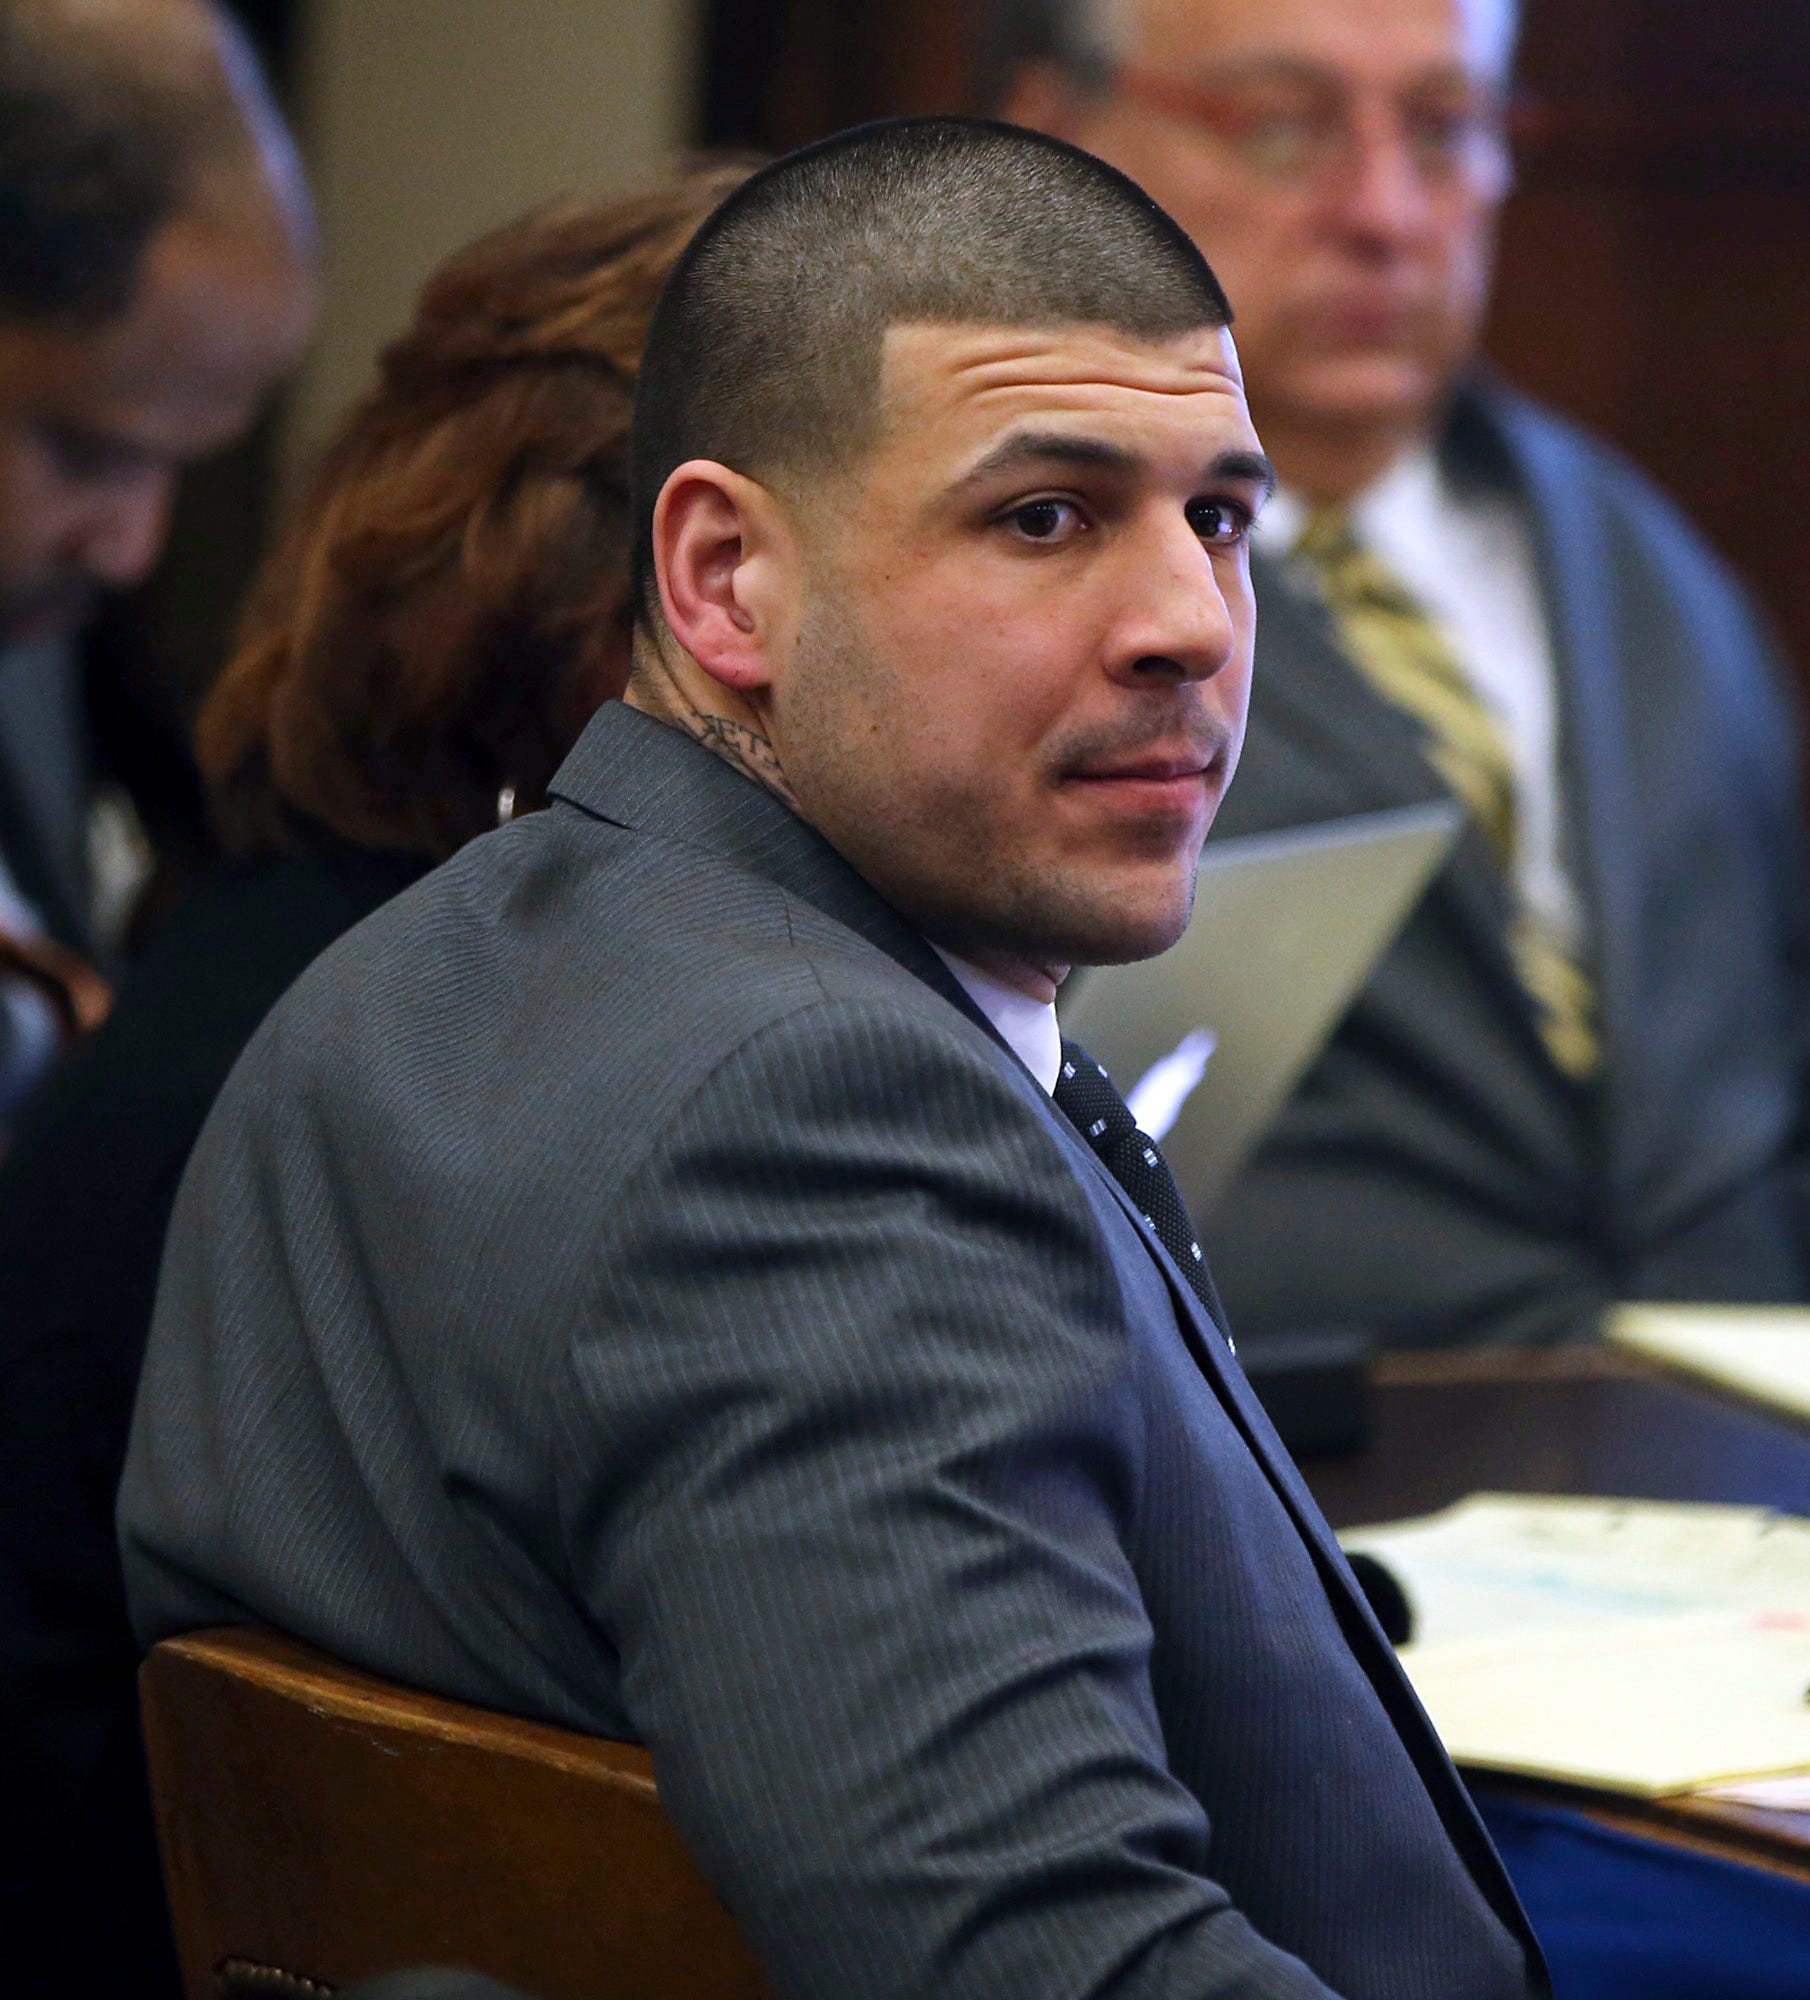 Report: Aaron Hernandez was beaten frequently and sexually abused as a child